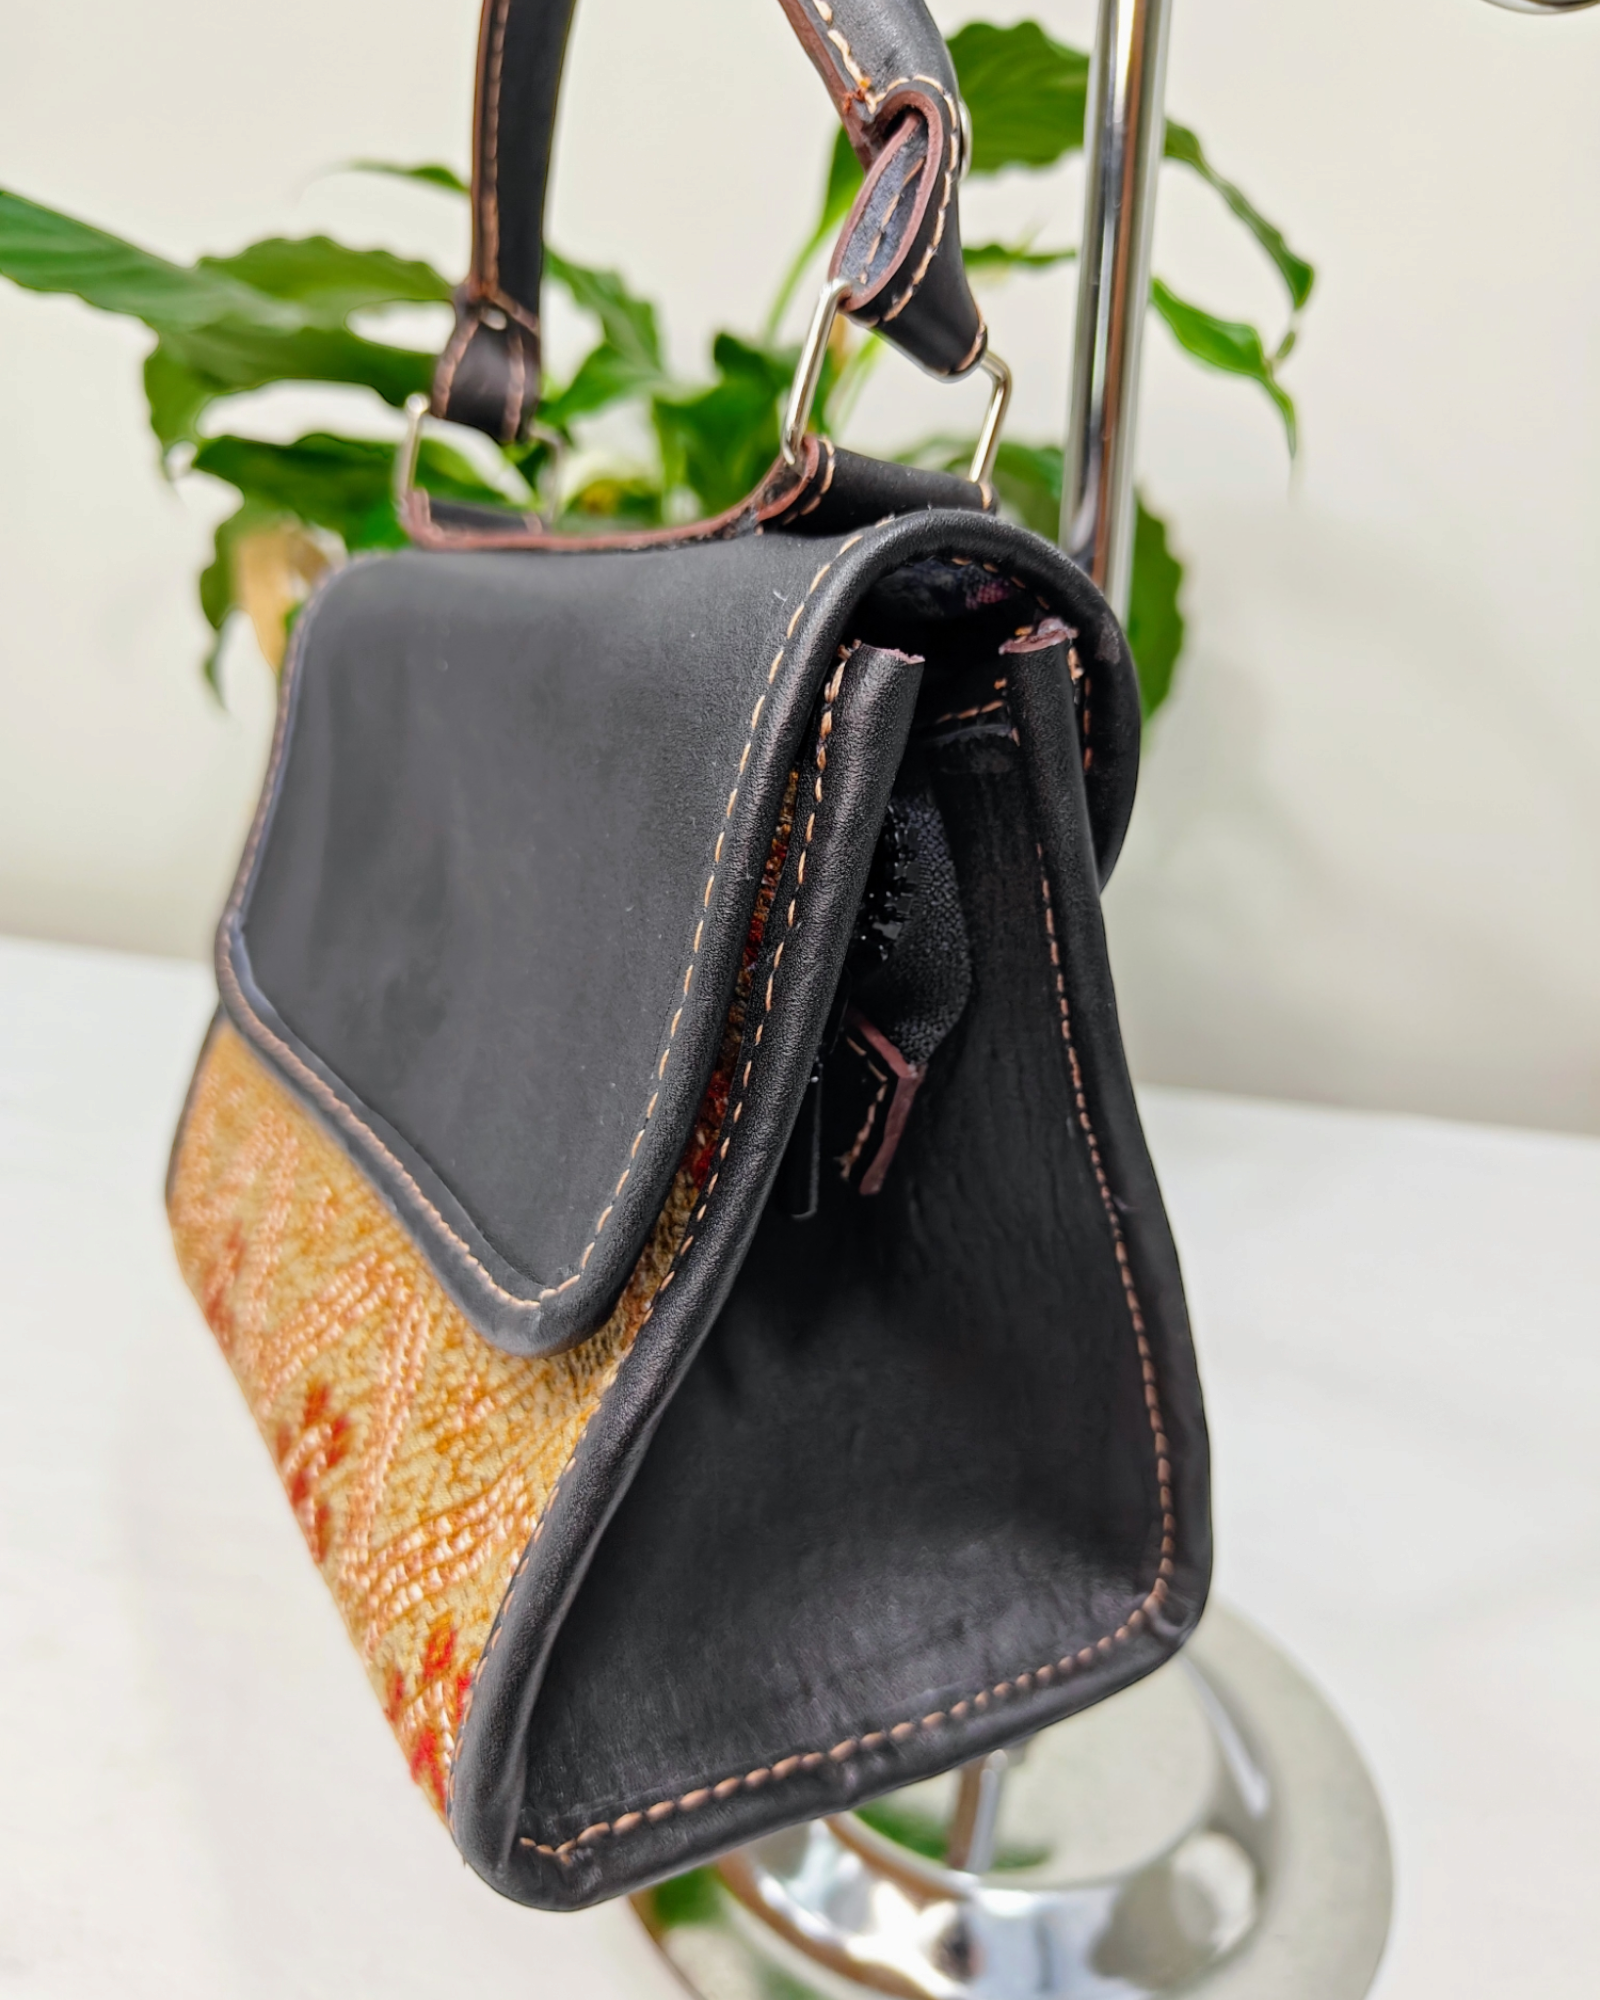 Elevate Your Style with The Small Black Handheld Handbag by Aura Maya Copper Golden